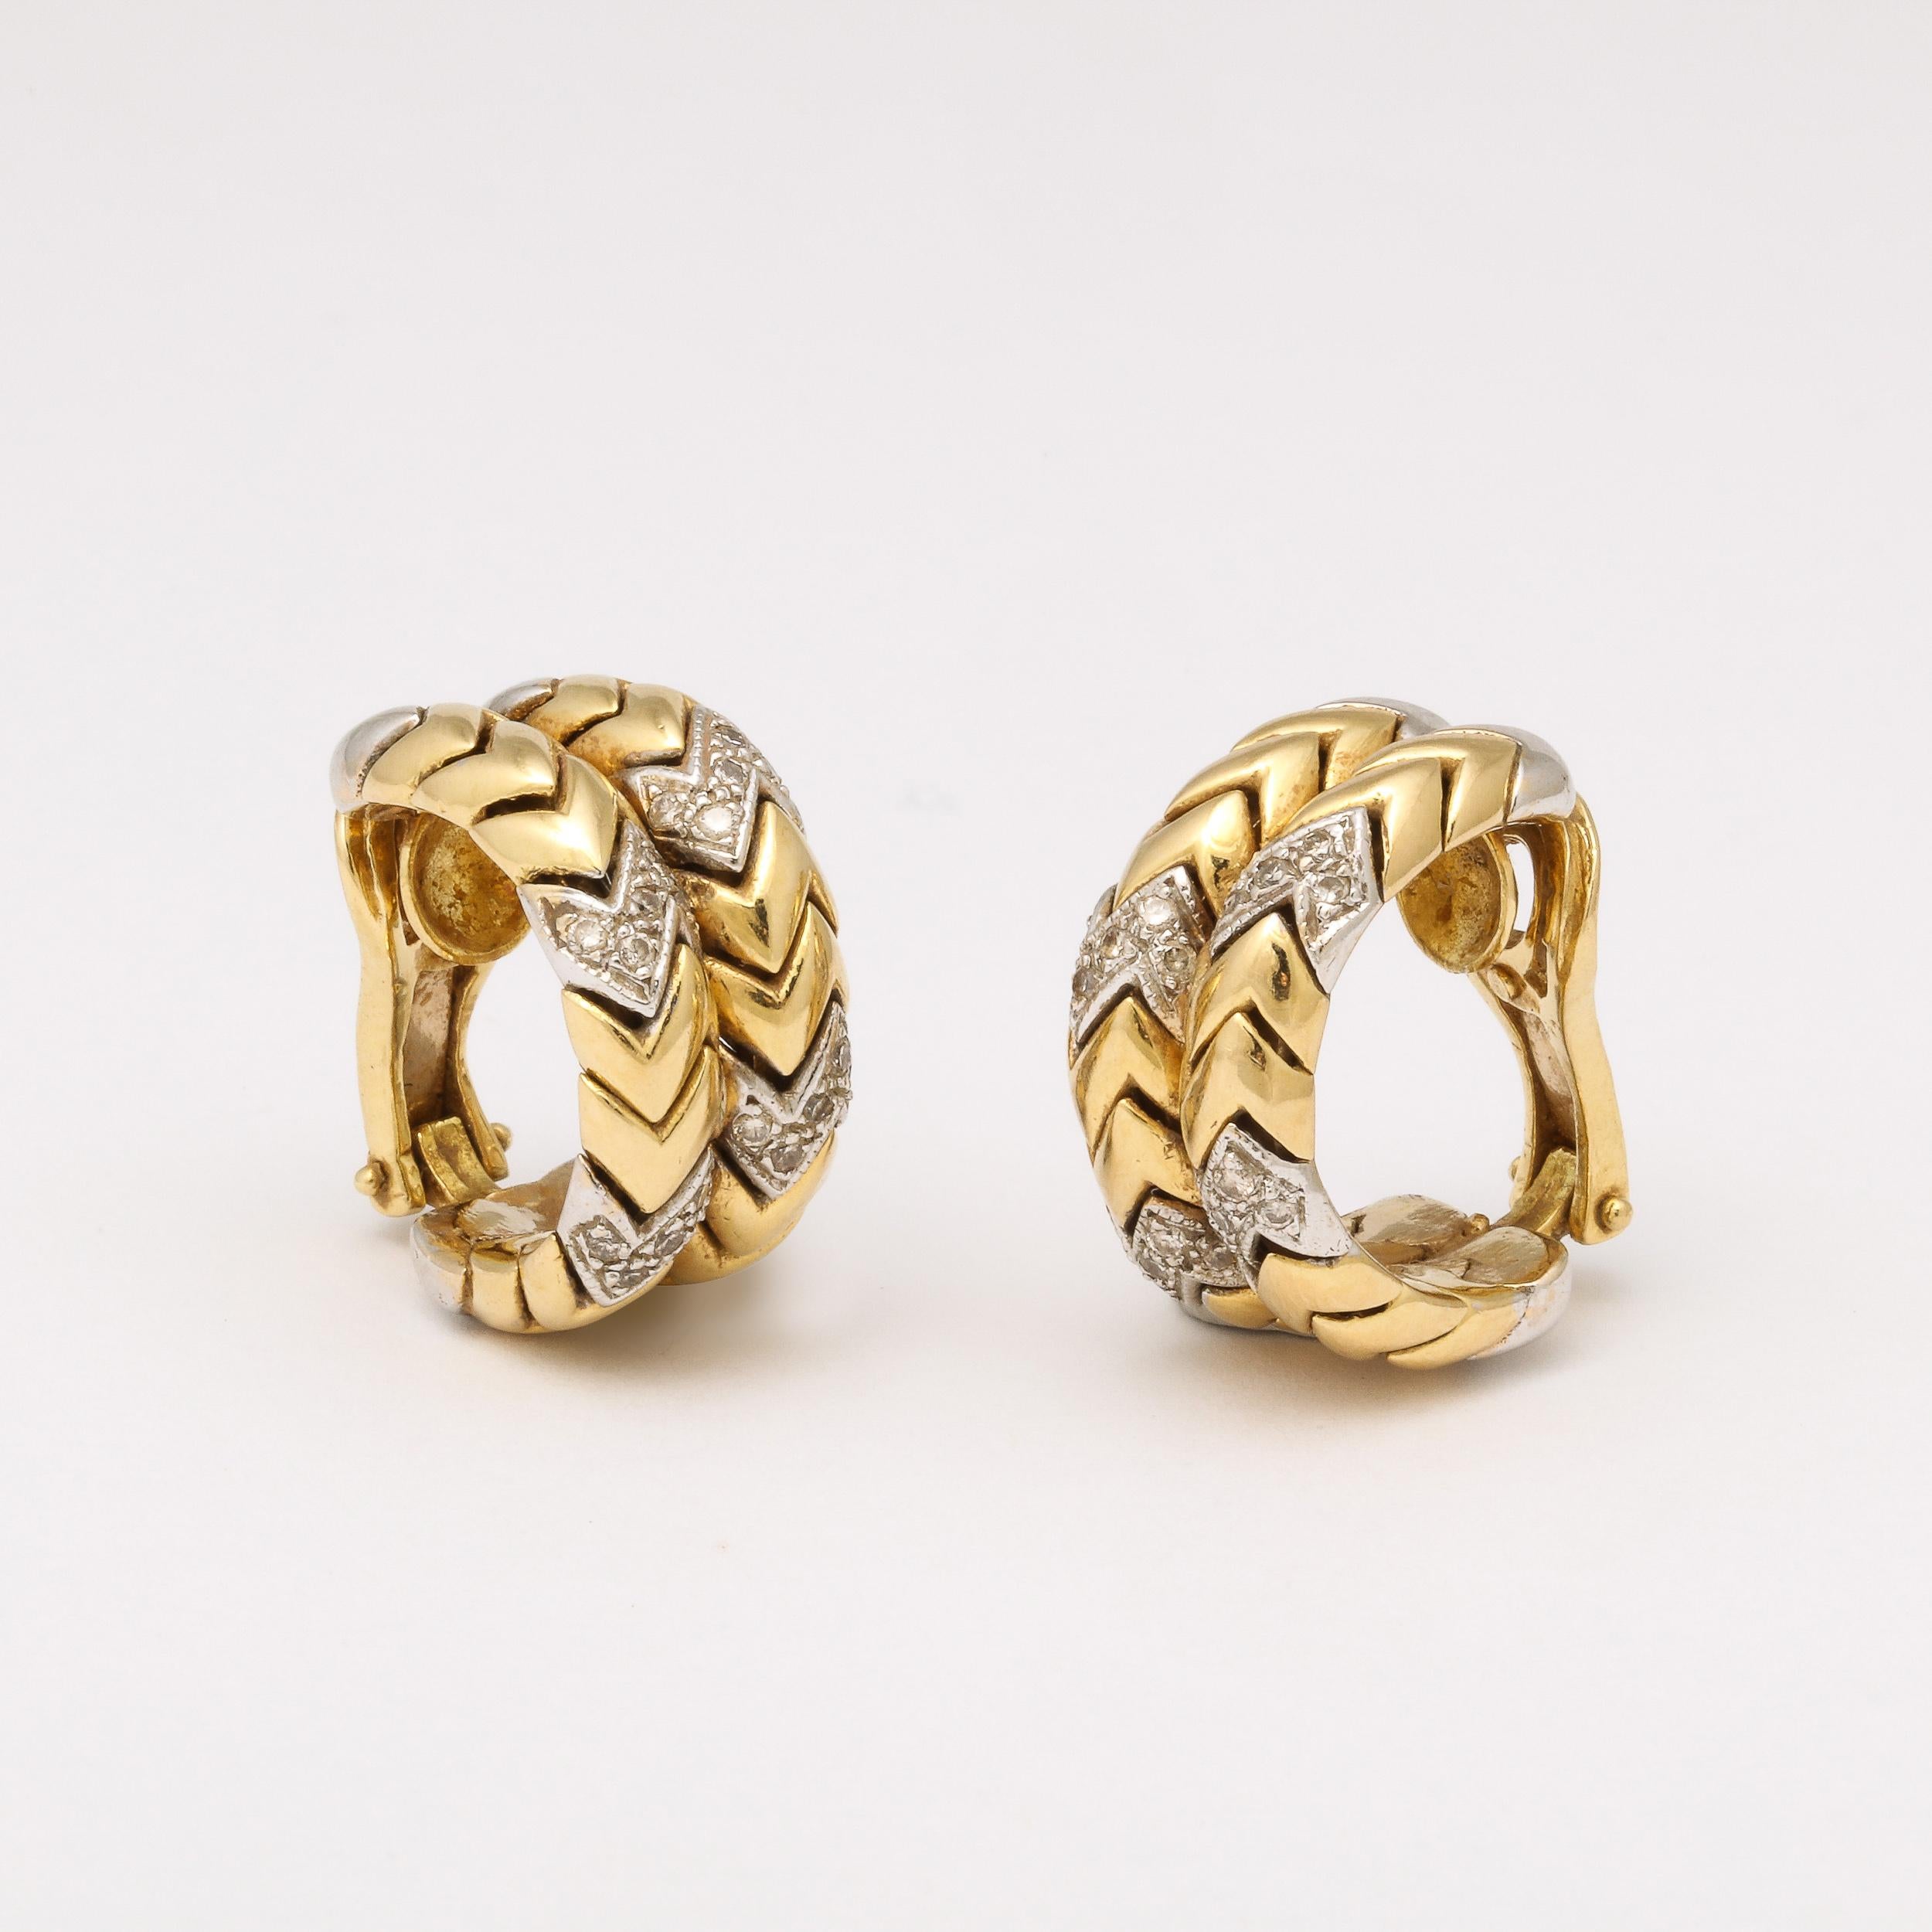 Pair of Midcentury 14 Carat Yellow and White Gold Earrings Inset with Diamonds In Excellent Condition For Sale In New York, NY